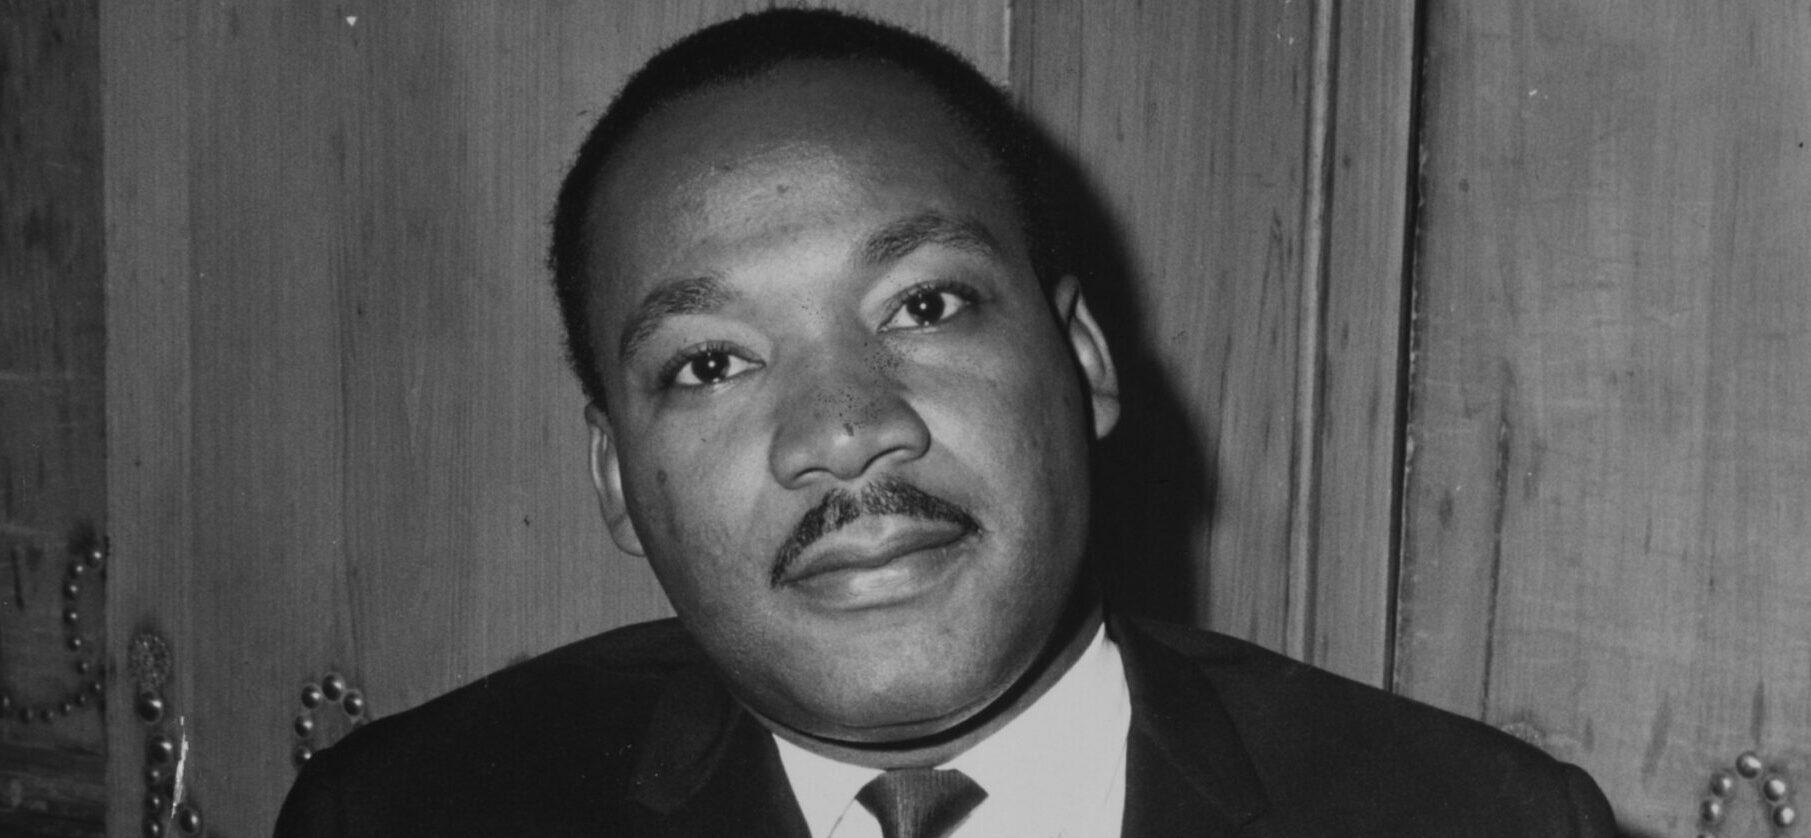 Woman Arrested For Trying To Pour Gasoline On MLK’s Childhood Home